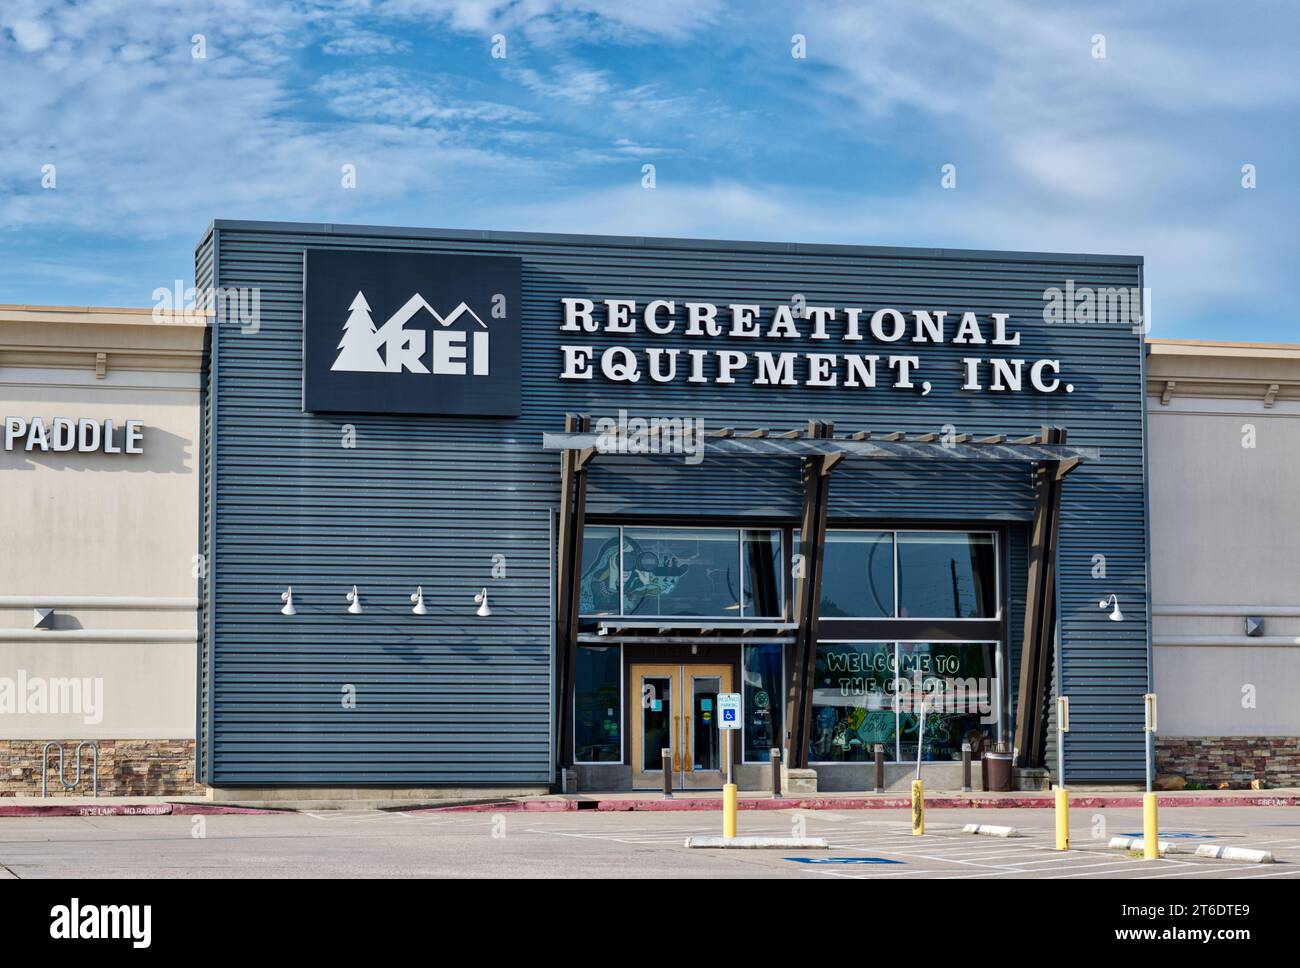 Houston, Texas USA 07-04-2023: Recreational Equipment Inc. business storefront exterior in Houston, TX. REI outdoor co-op founded in 1938. Stock Photo